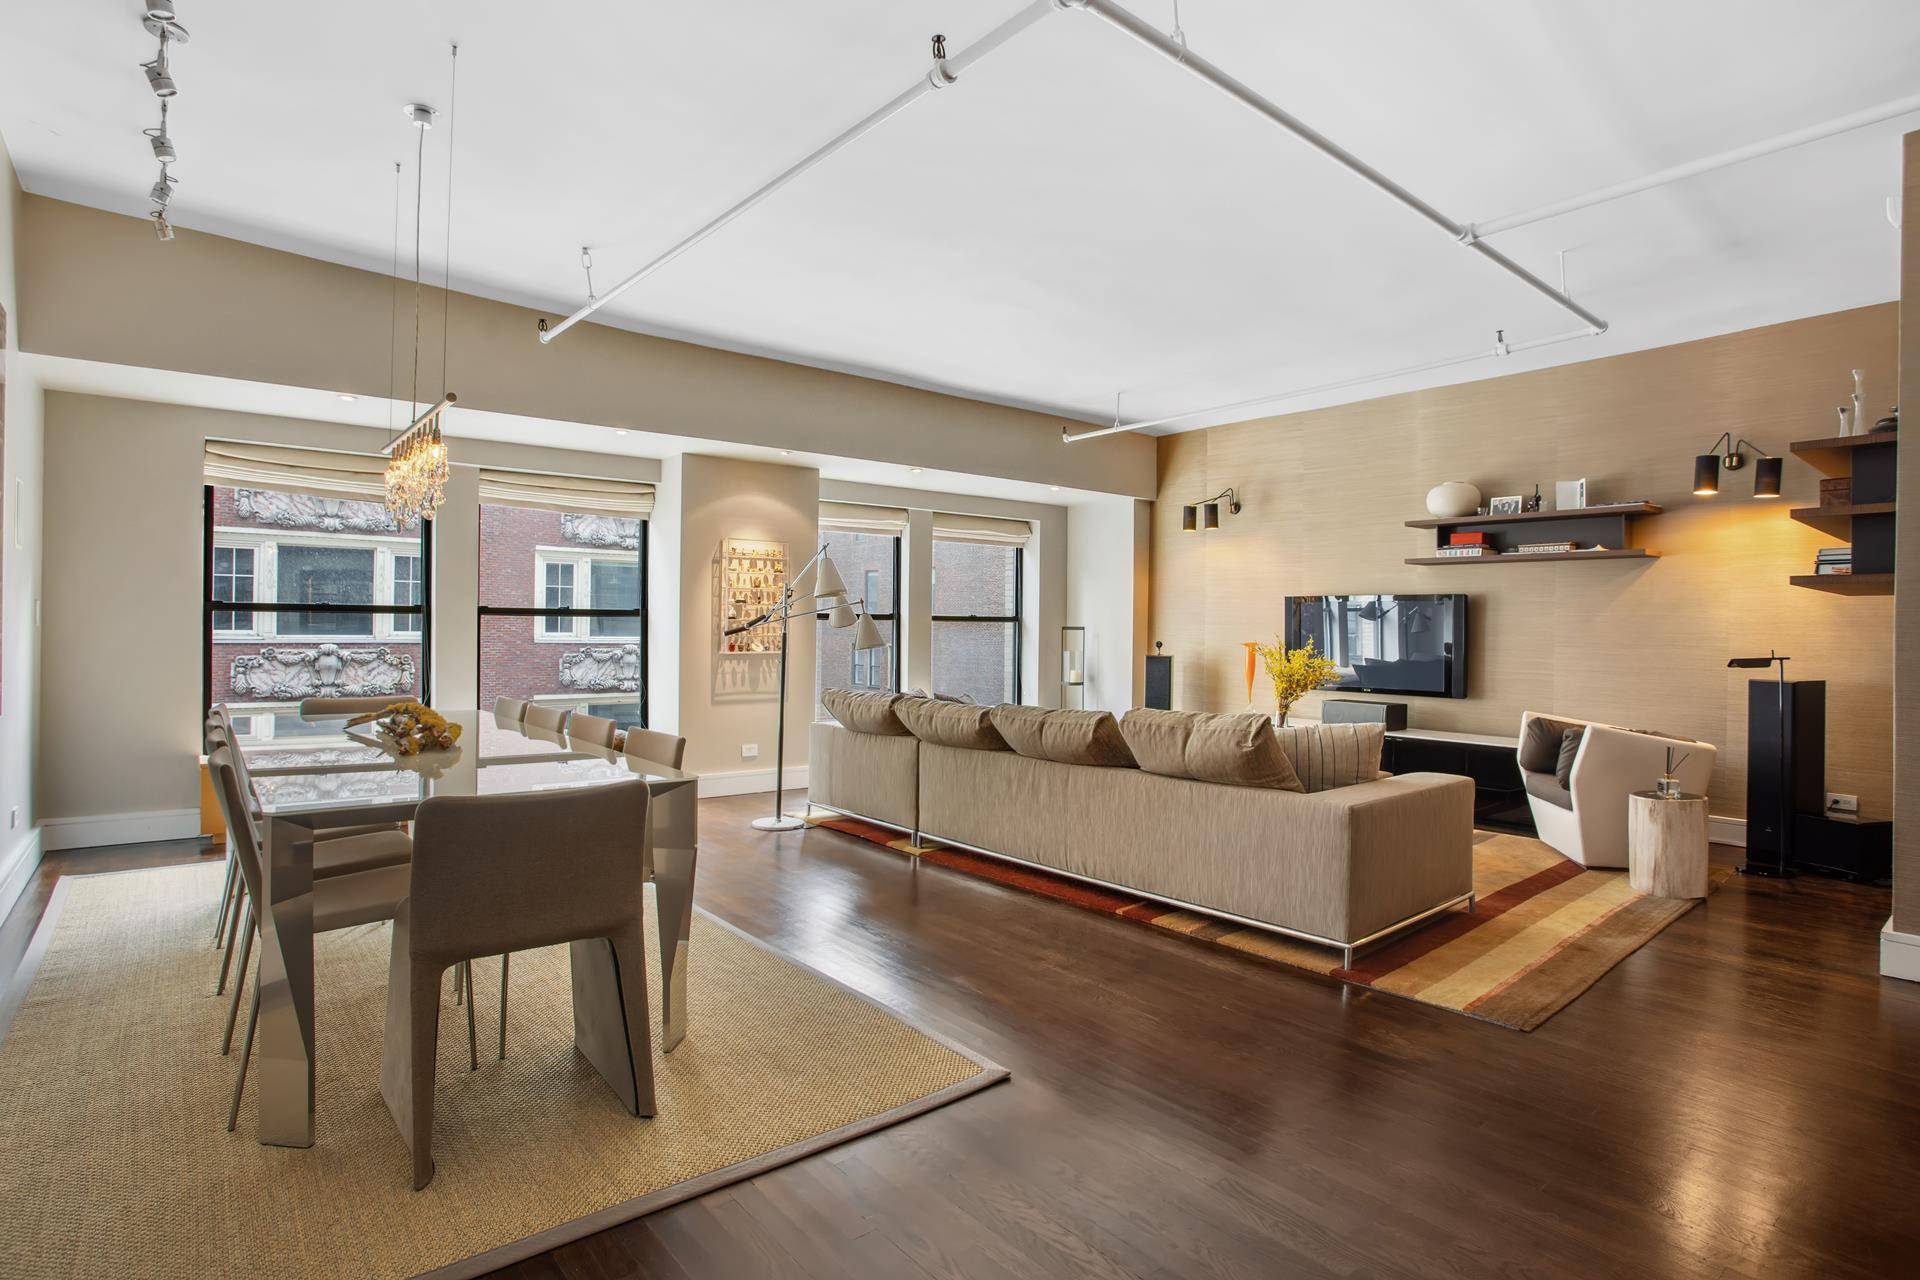 Fantastic 2 bedroom with 2 bathroom loft in a boutique CONDO with approximately 1750 sq ft on a prime flatiron block with architectural views looking onto 18th street.